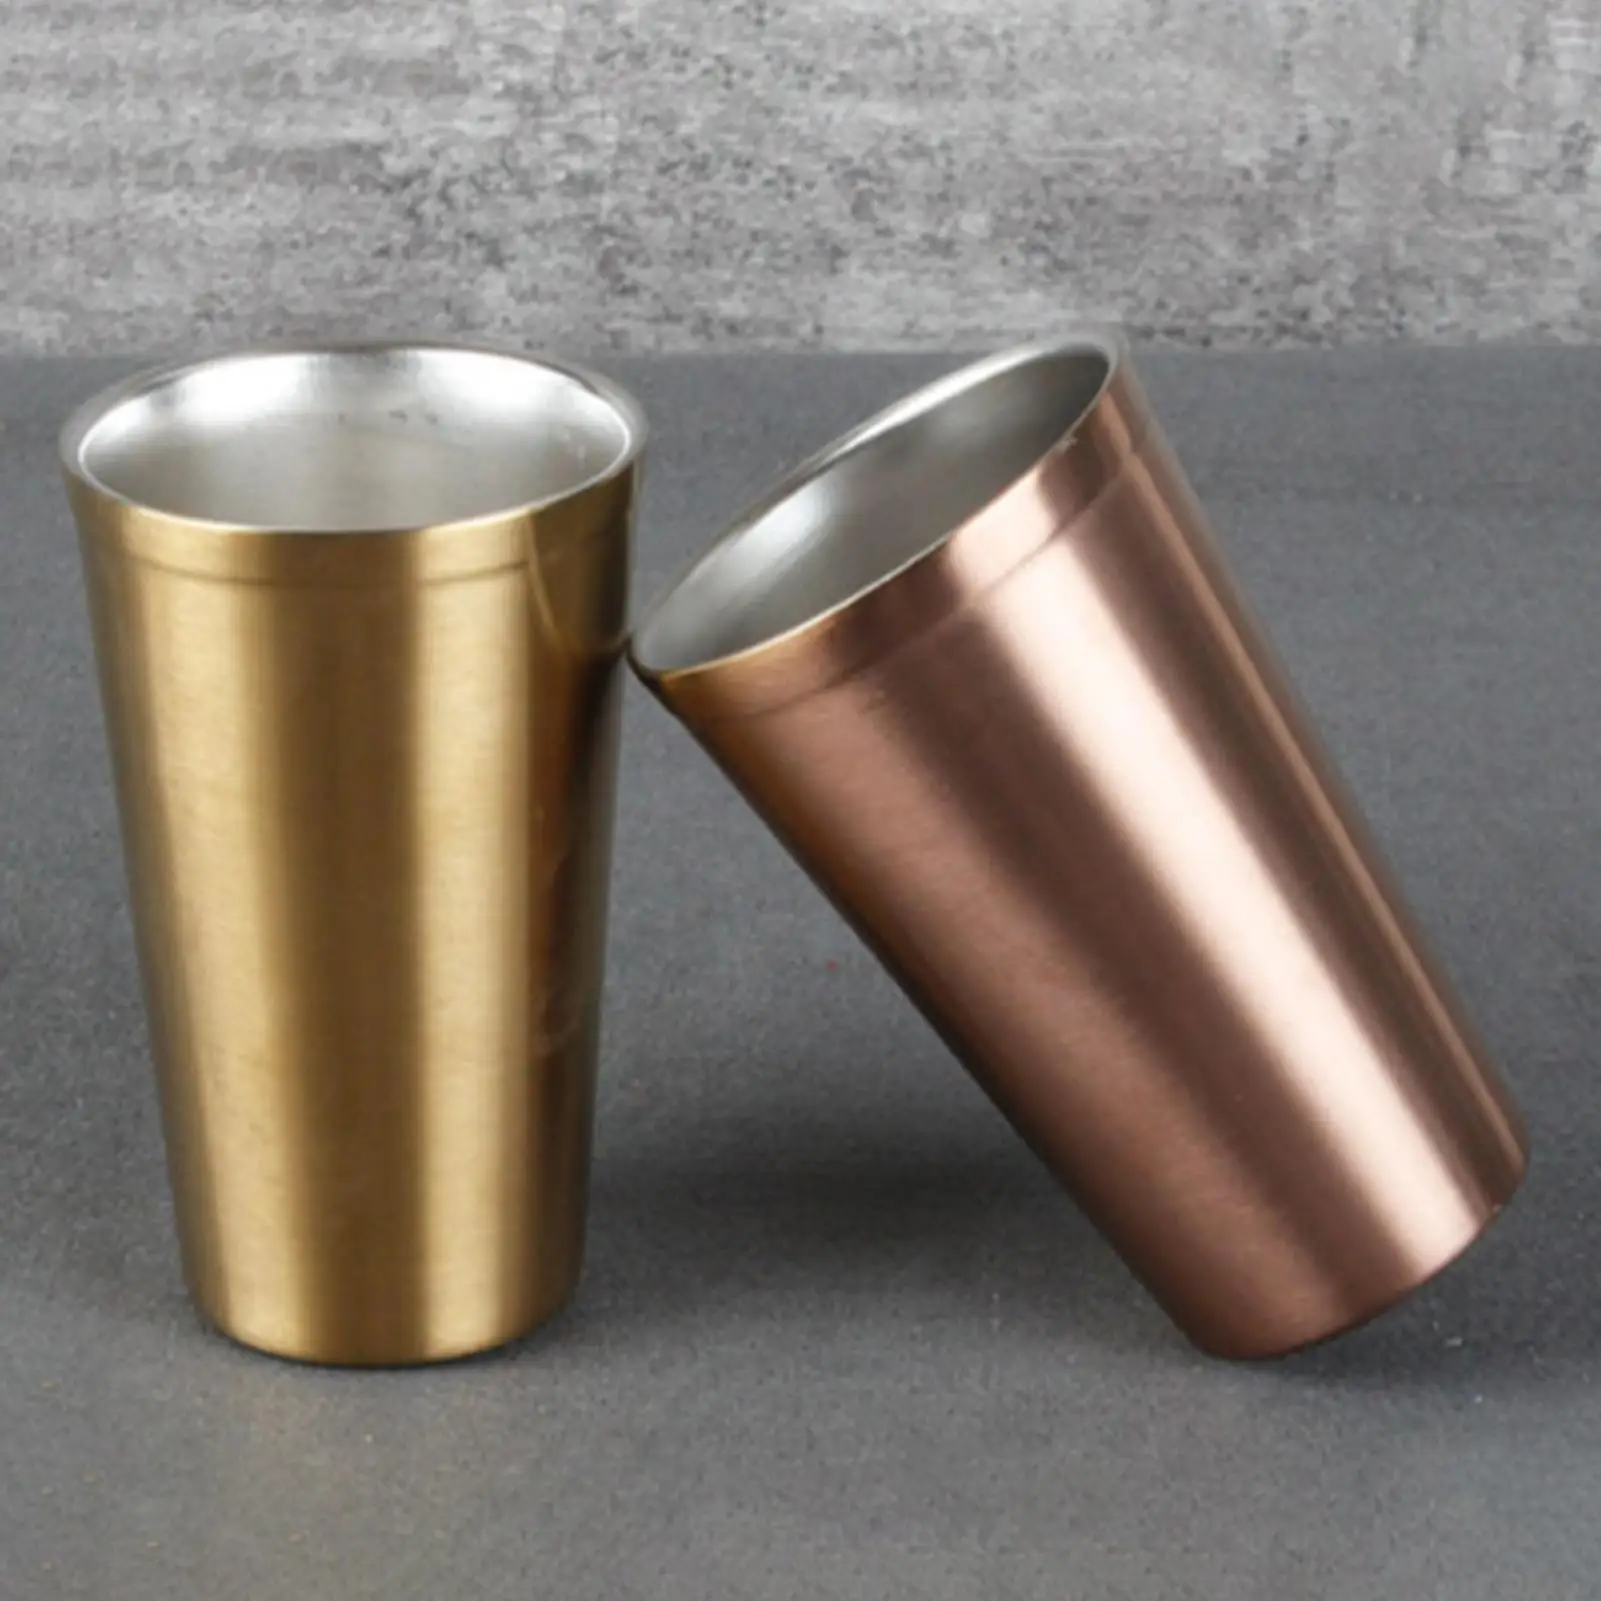 

480ML 304 Stainless Steel Double-Layer Anti-Fall Drink Cup Beer Glass Water Tea Milk Mugs Tumbler Pint Glasses Cups Travel Mugs